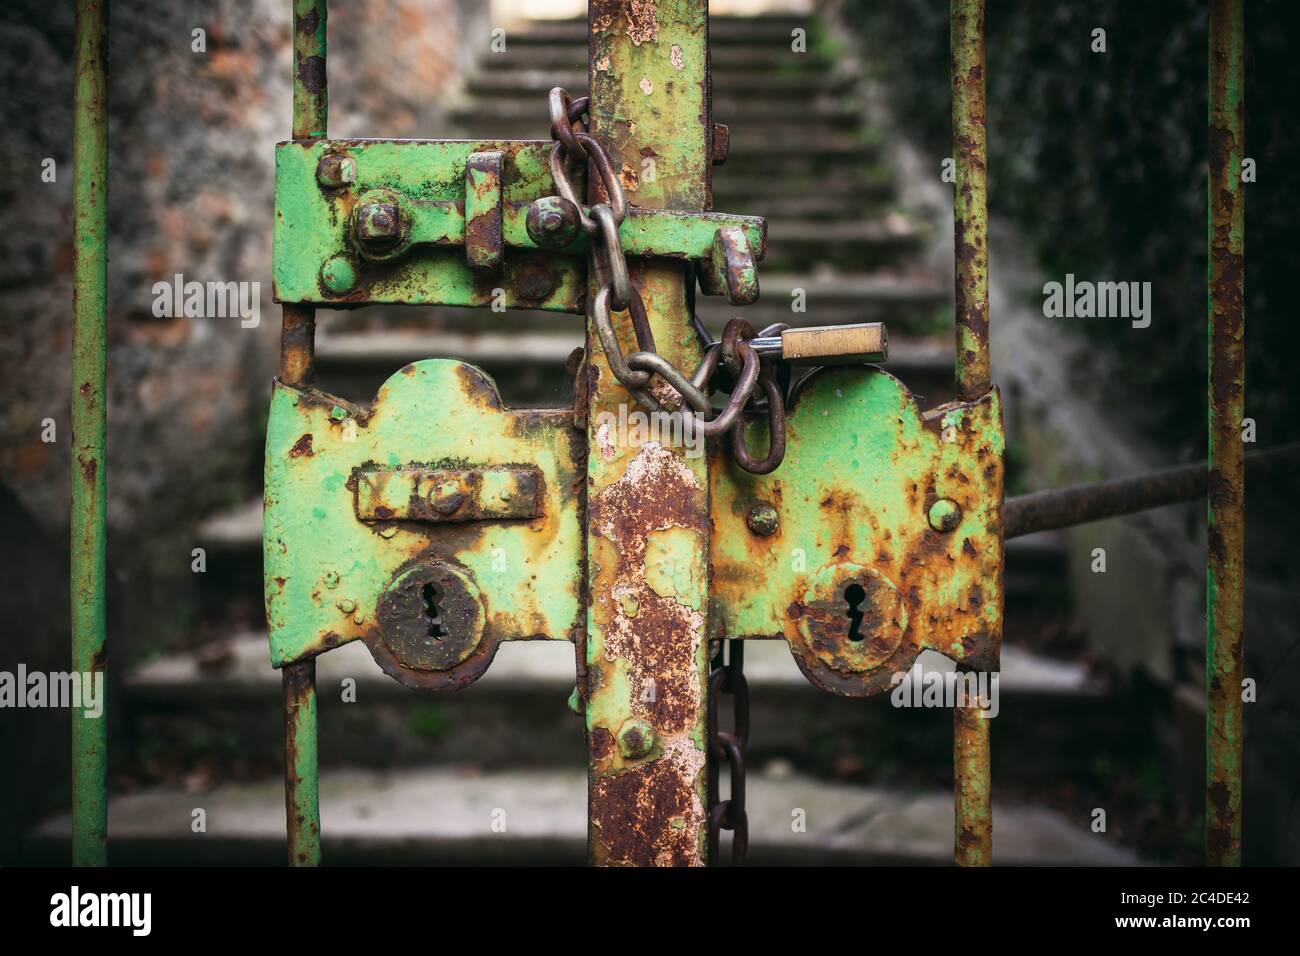 exterior view of a really old, closed and rusty green iron gate with chain and padlock Stock Photo